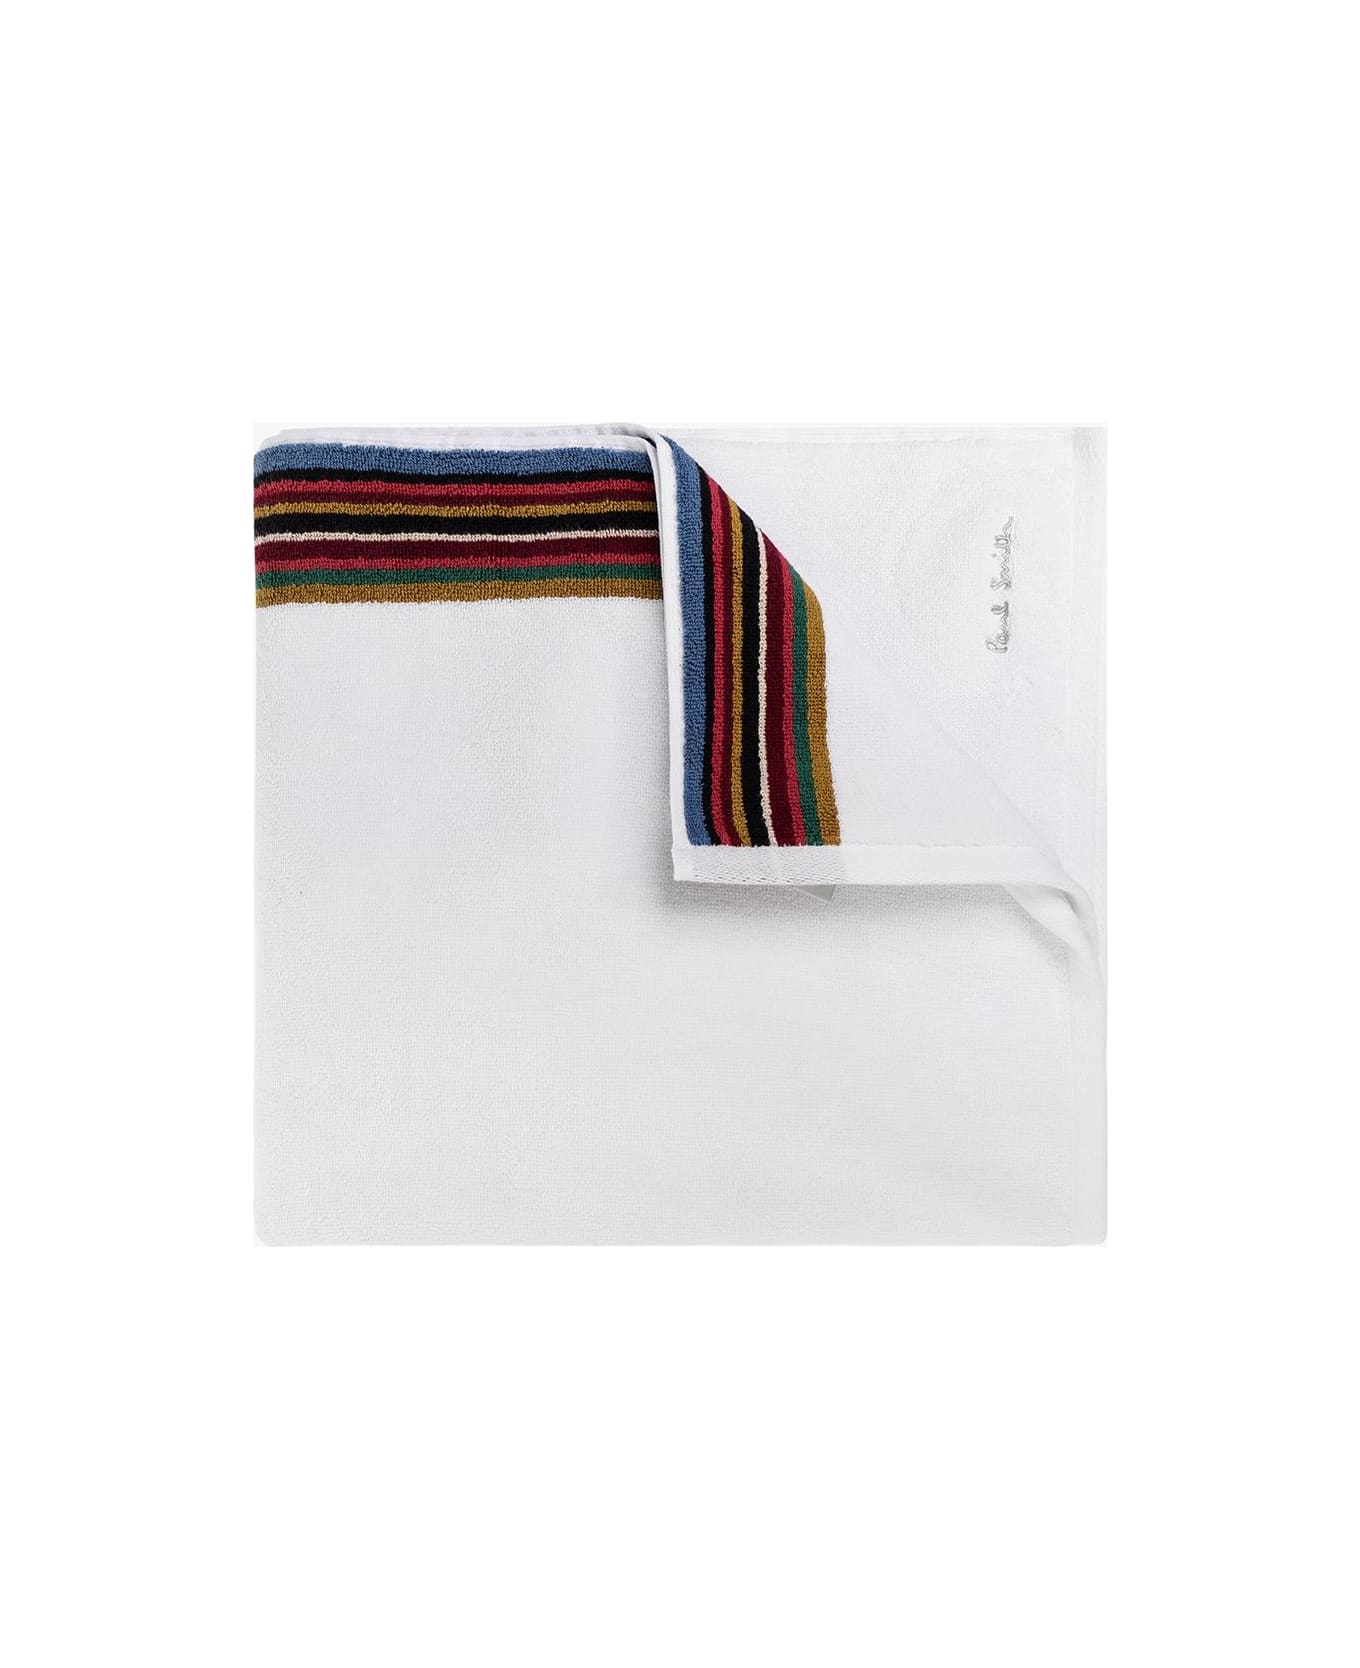 Paul Smith Set Of 3 Towels - WHITE